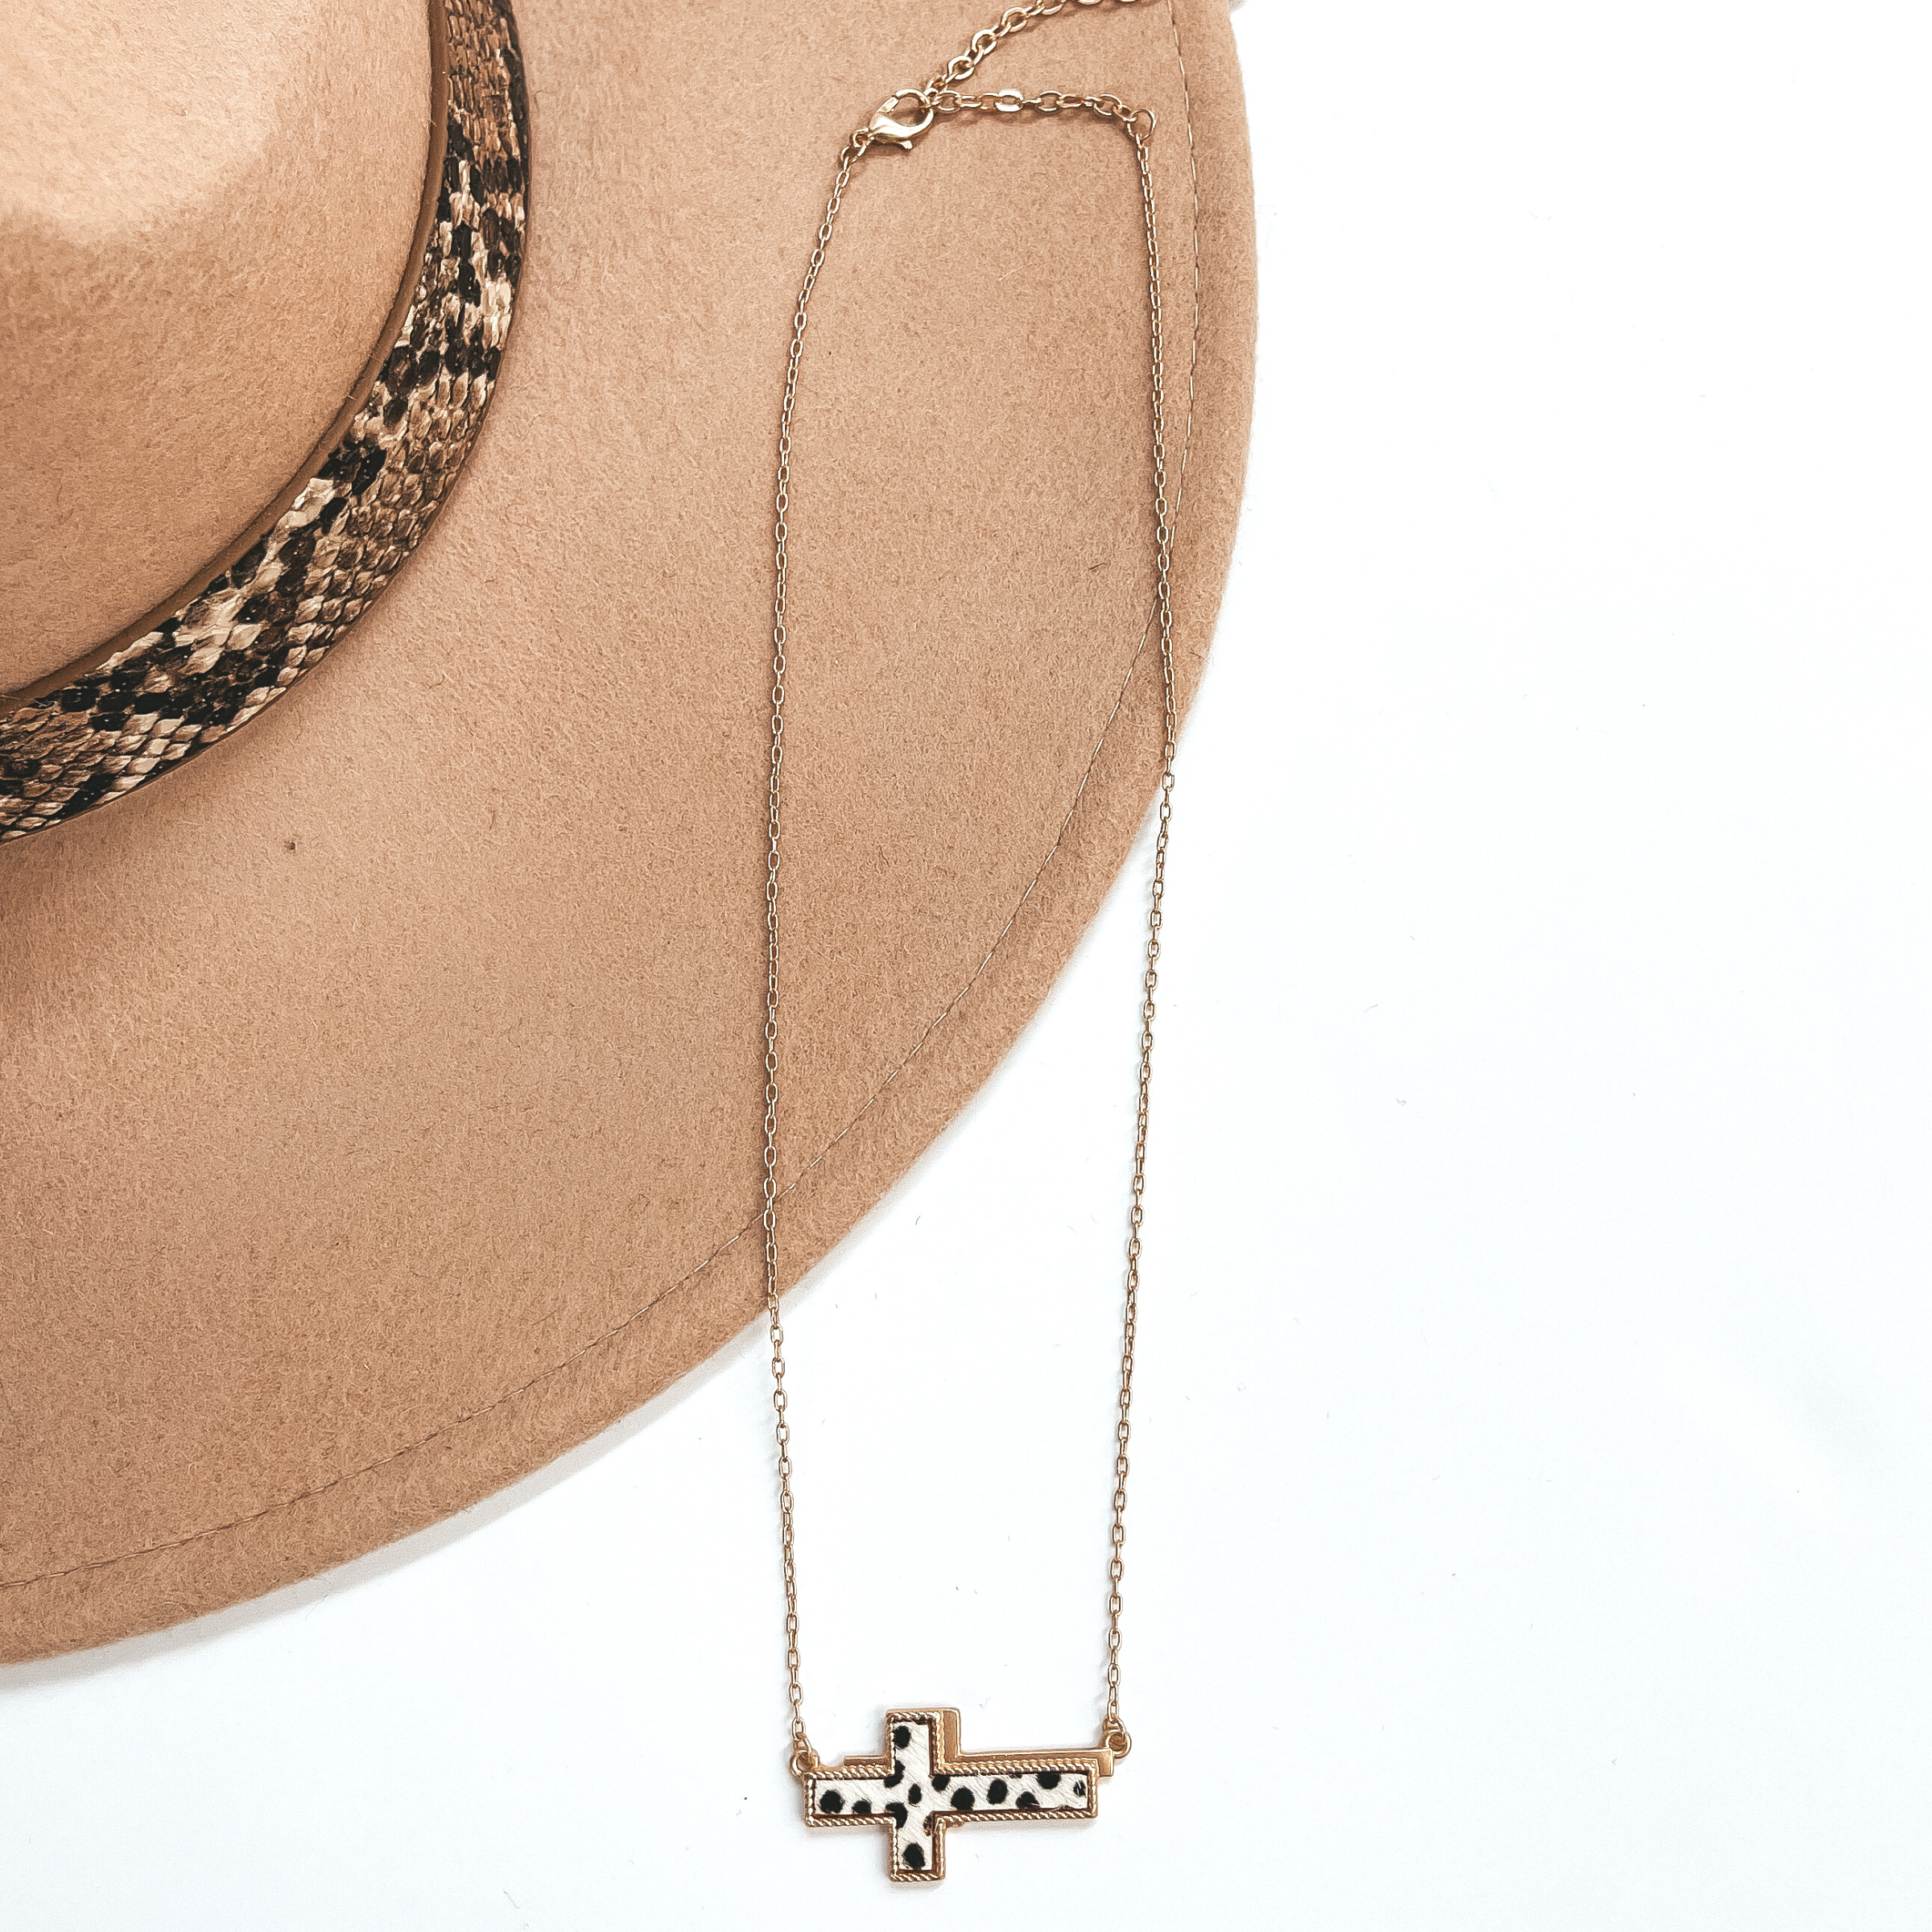 Lovely Dream Gold Cross Pendant Necklace with Faux Hide Inlay in Dotted Print - Giddy Up Glamour Boutique